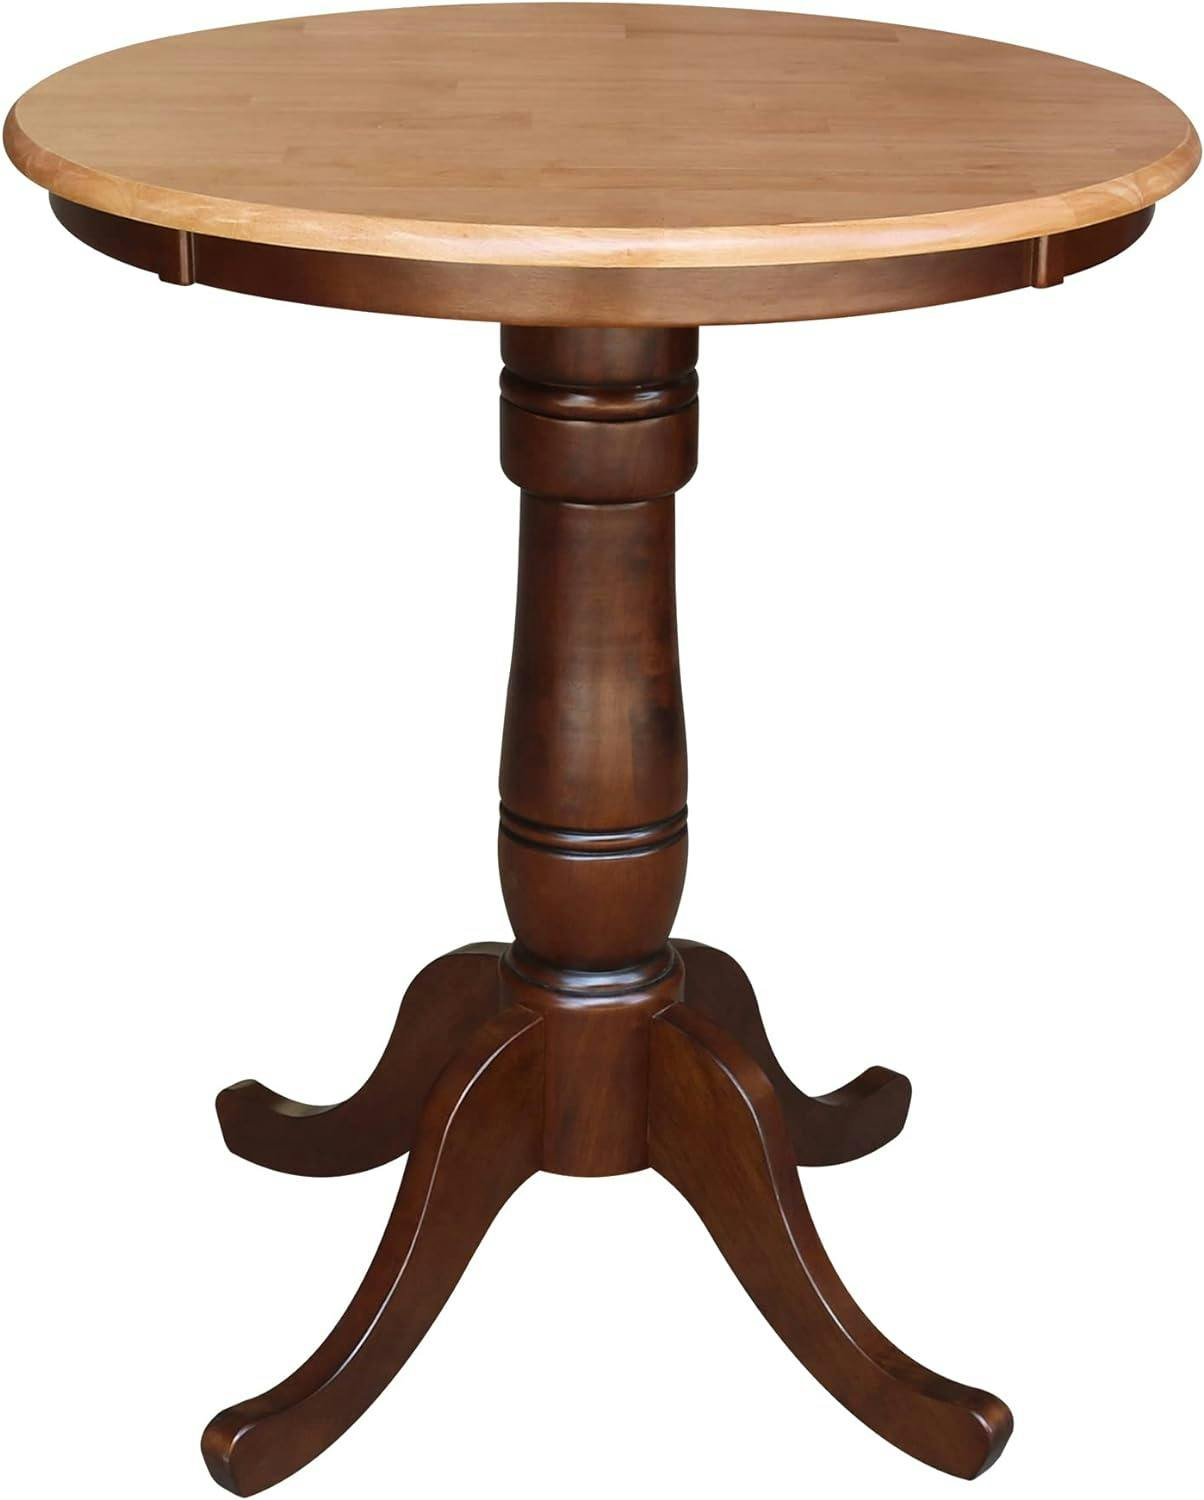 Farmhouse Charm 33" Round Extendable Wood Counter Height Table in Cinnamon